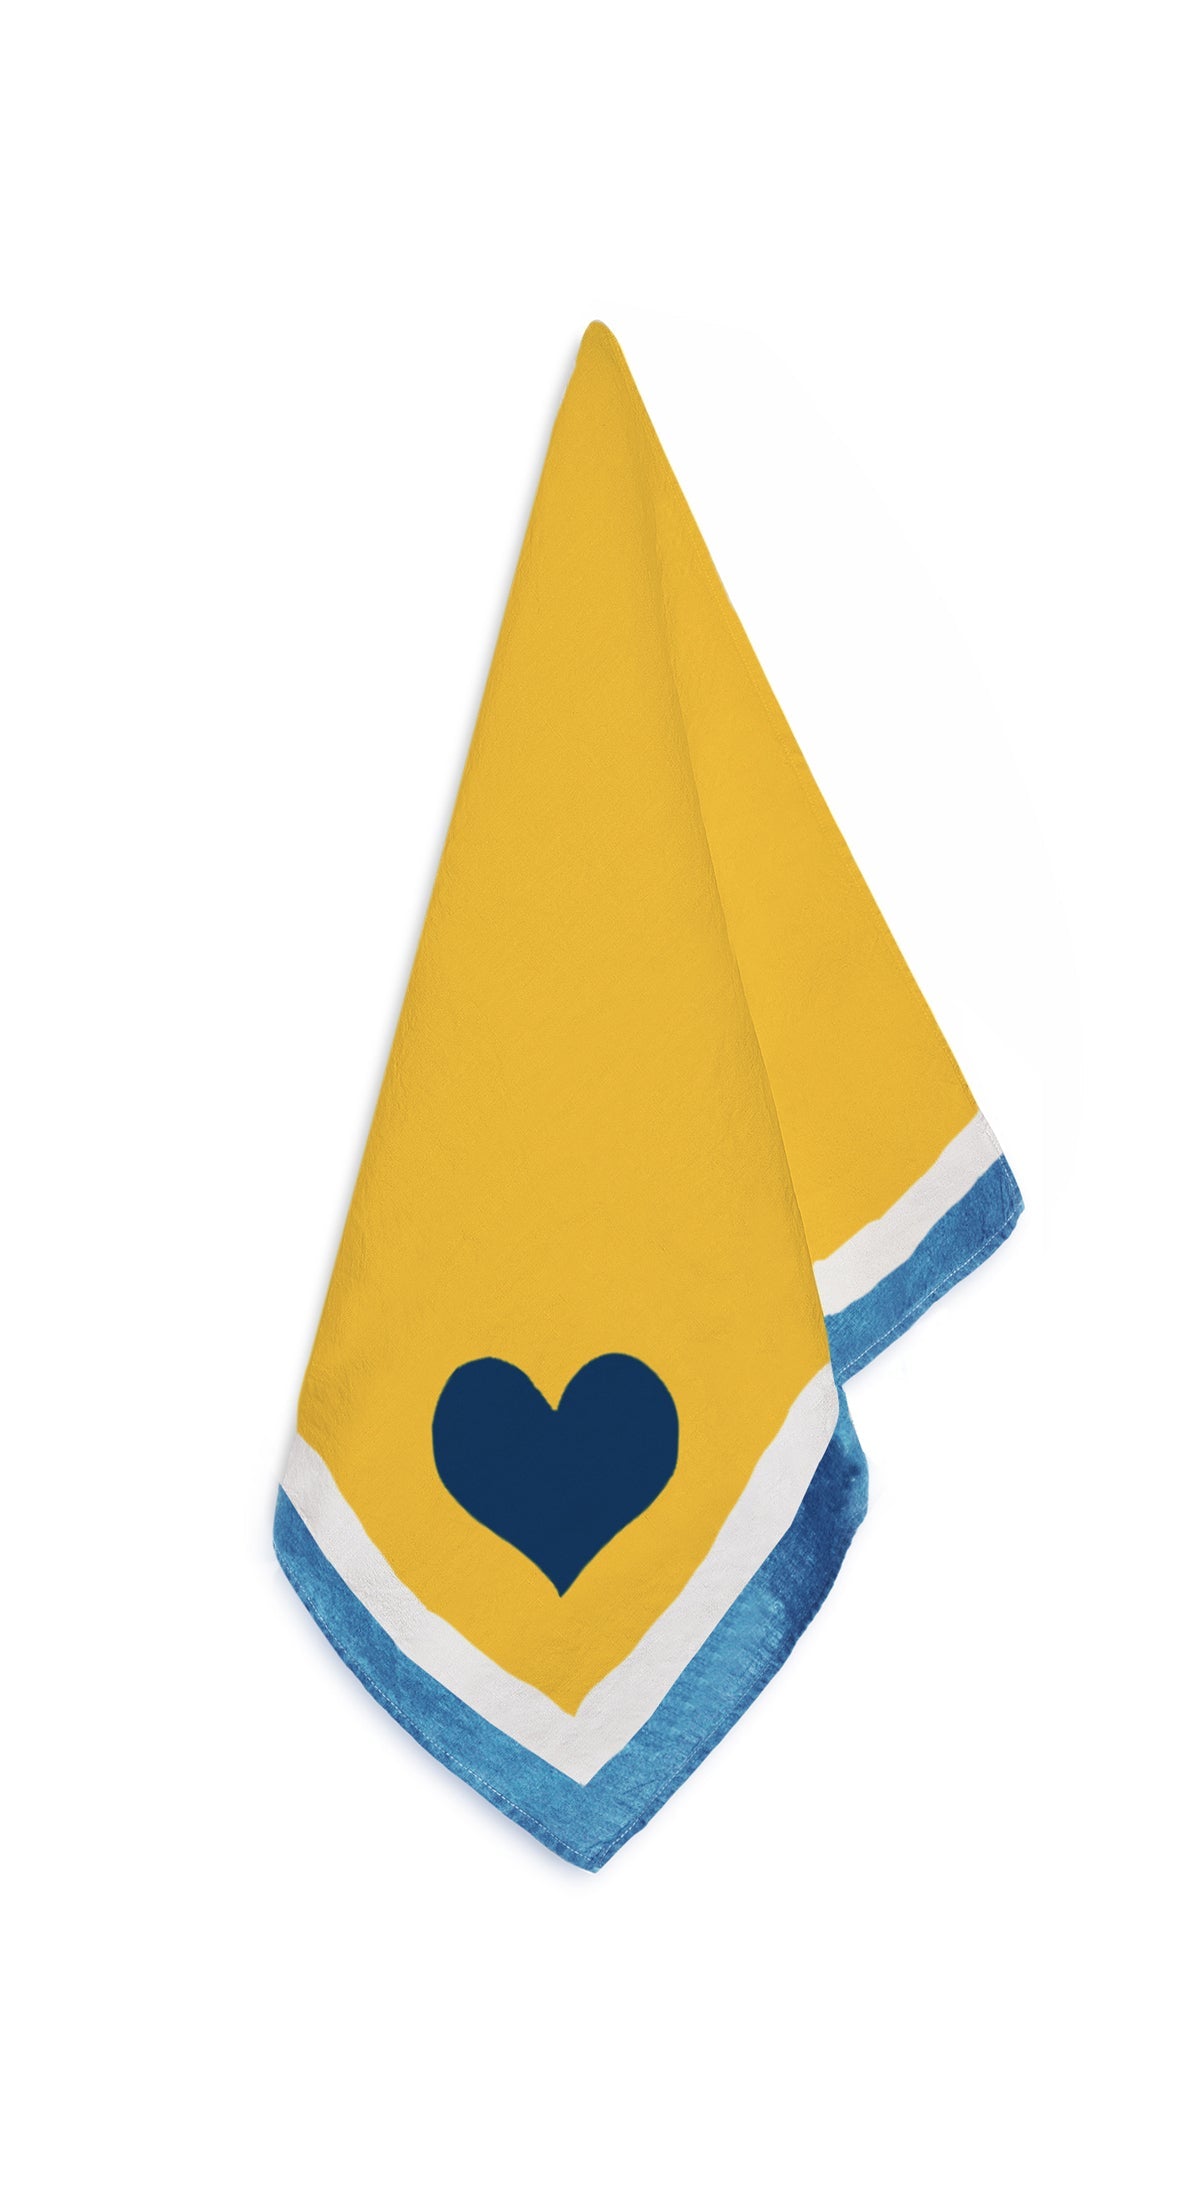 Summerill & Bishop x Lisou Heart Linen Napkin in Light Blue and Yellow, 50x50cm